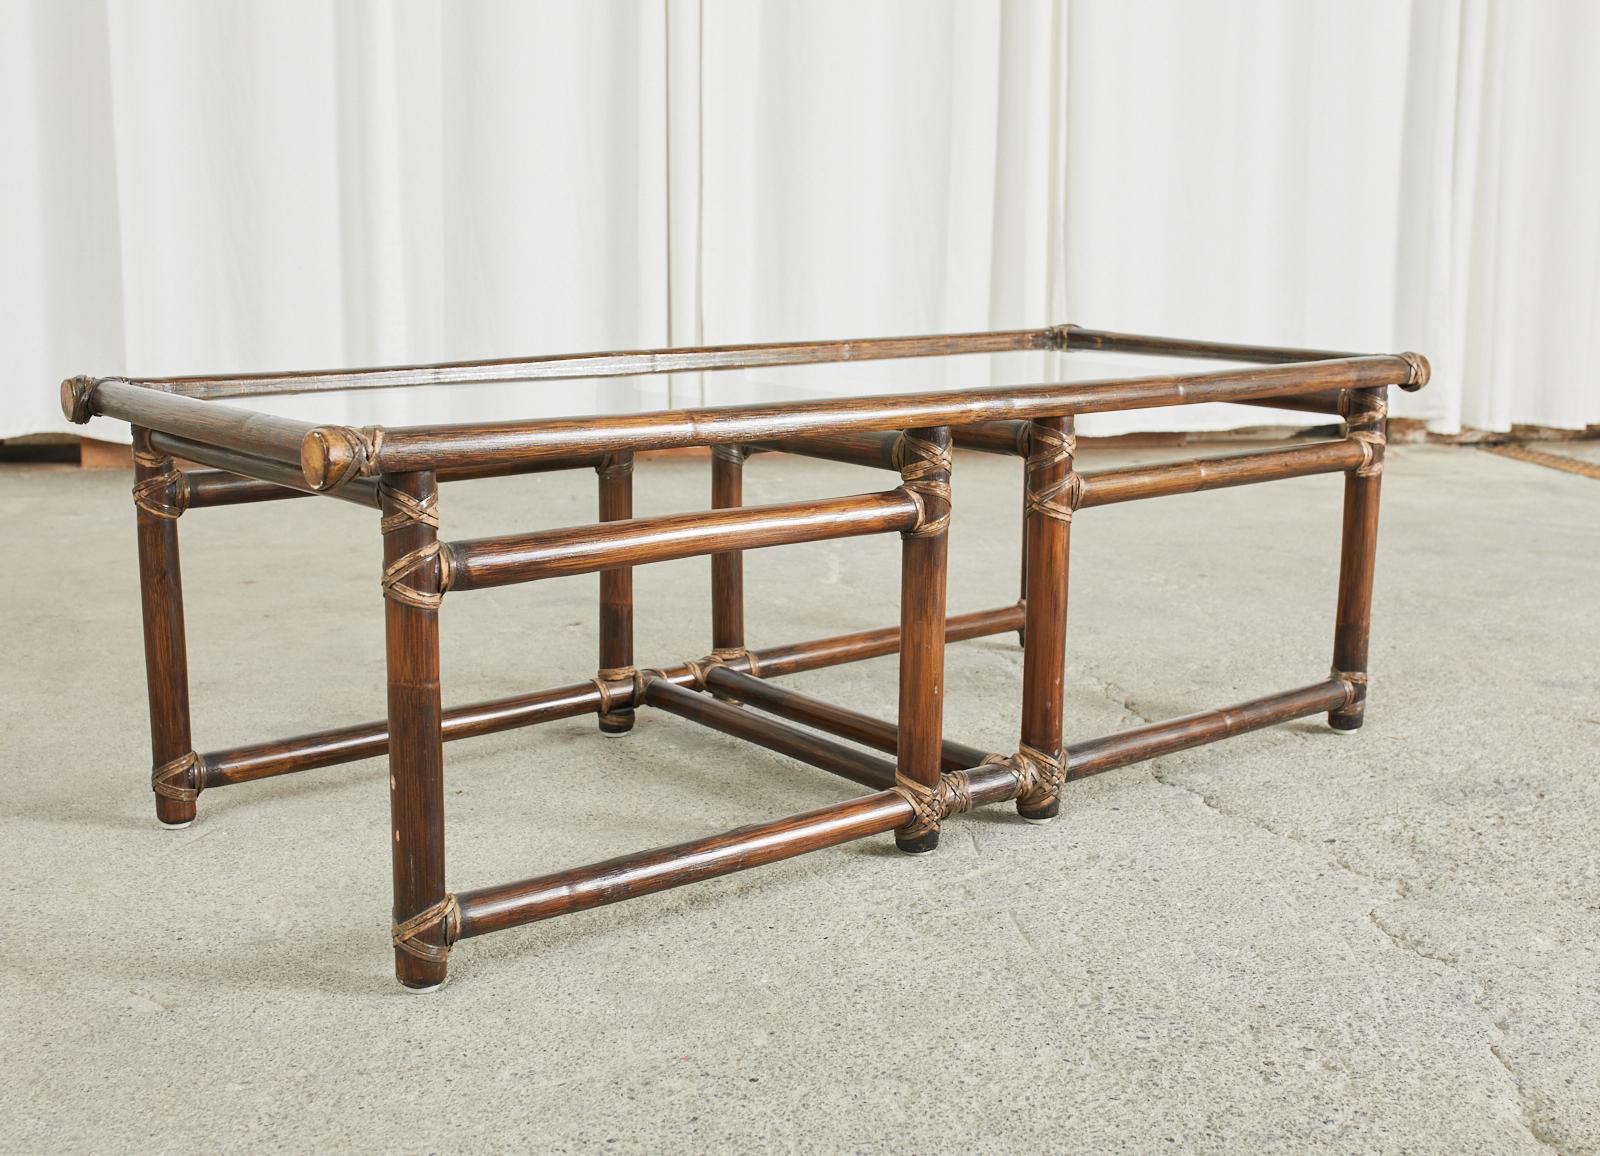 Genuine McGuire rattan coffee table or cocktail table with an inset pane of glass on top. Made in the California organic modern style featuring rattan poles lashed together with leather rawhide laces and caps. The open fretwork design keeps the